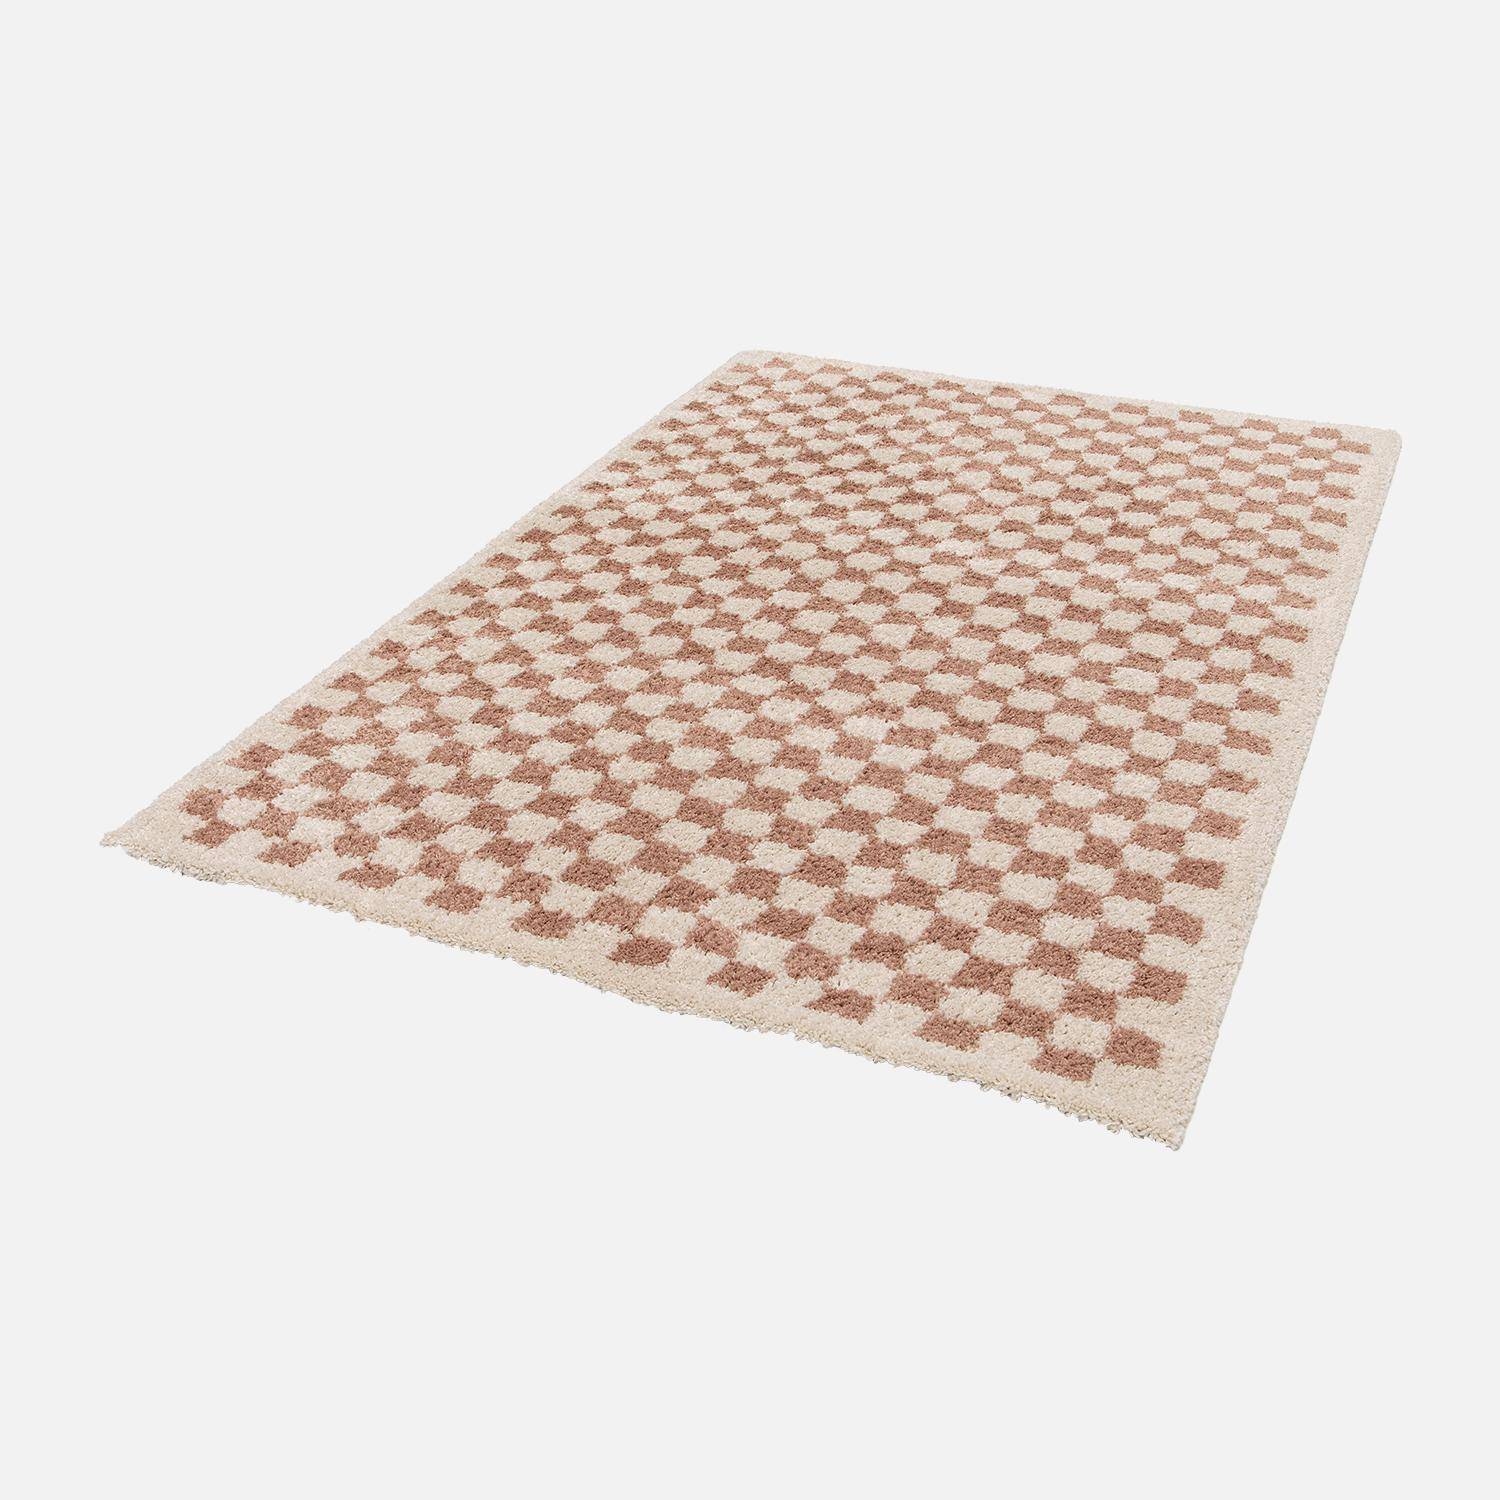 Old pink and cream checkerboard interior carpet, Taylor, 160 x 230 cm Photo3